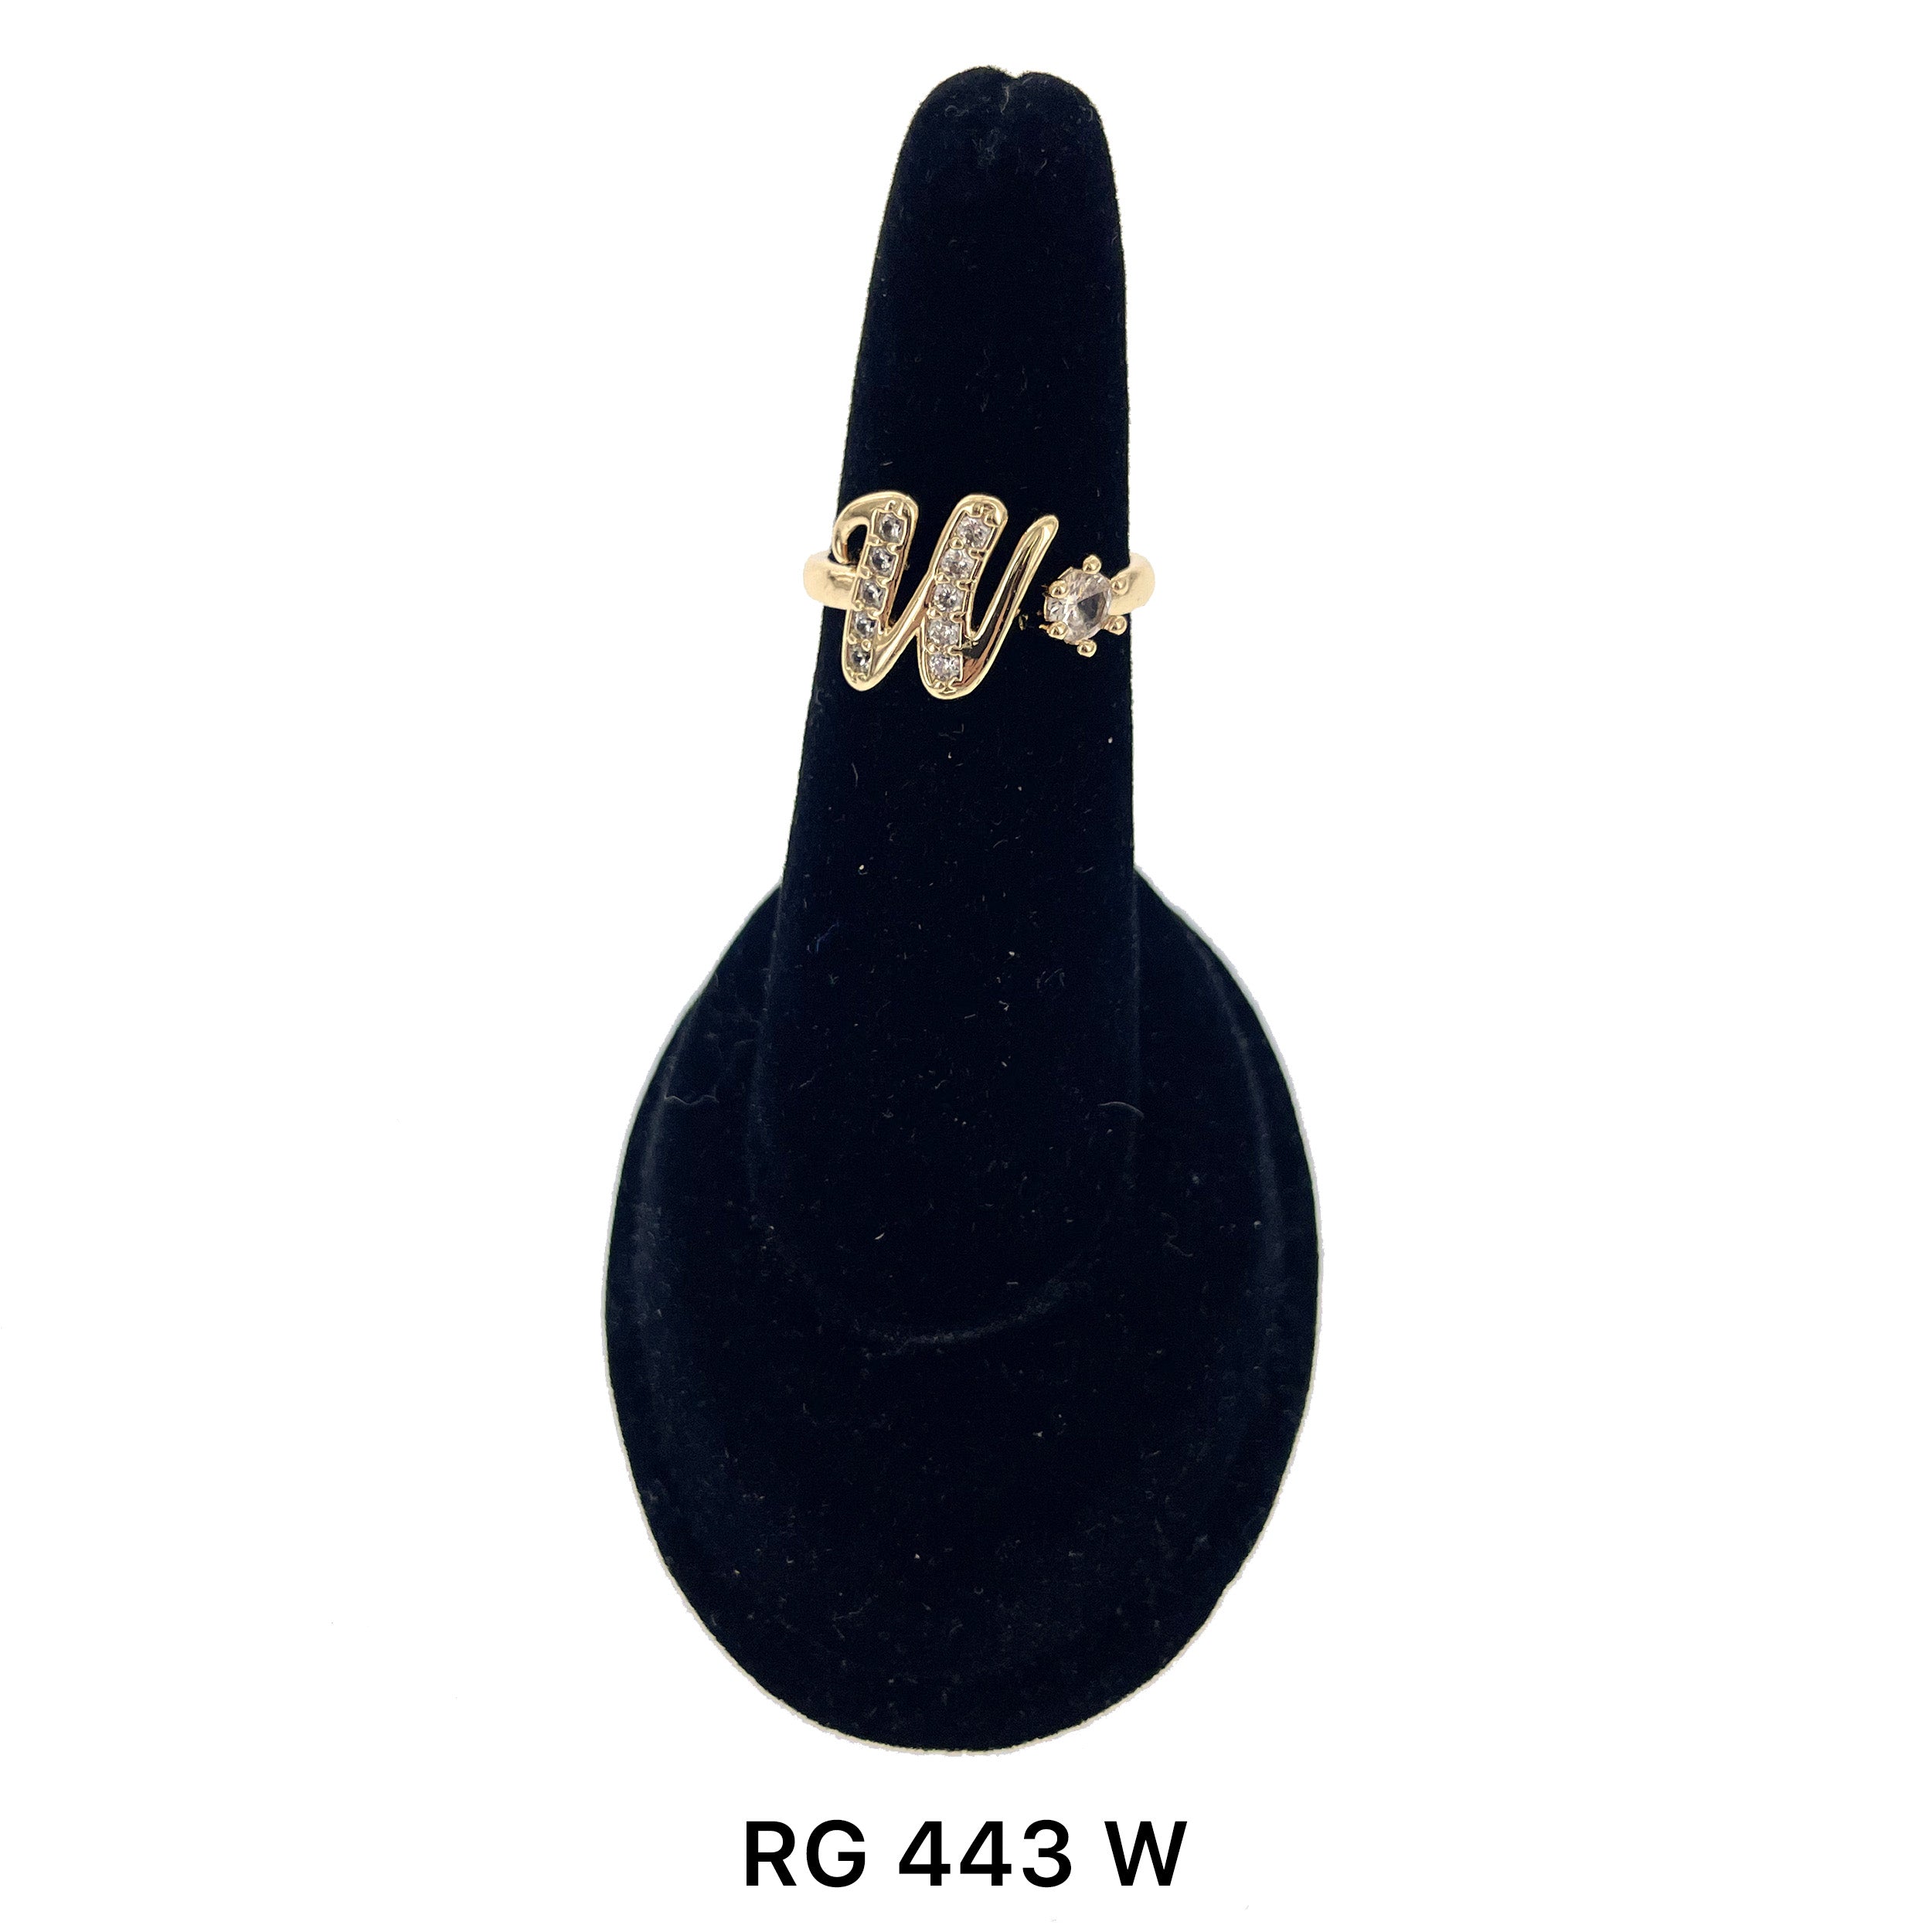 Initial Adjustable Ring RG 443 W